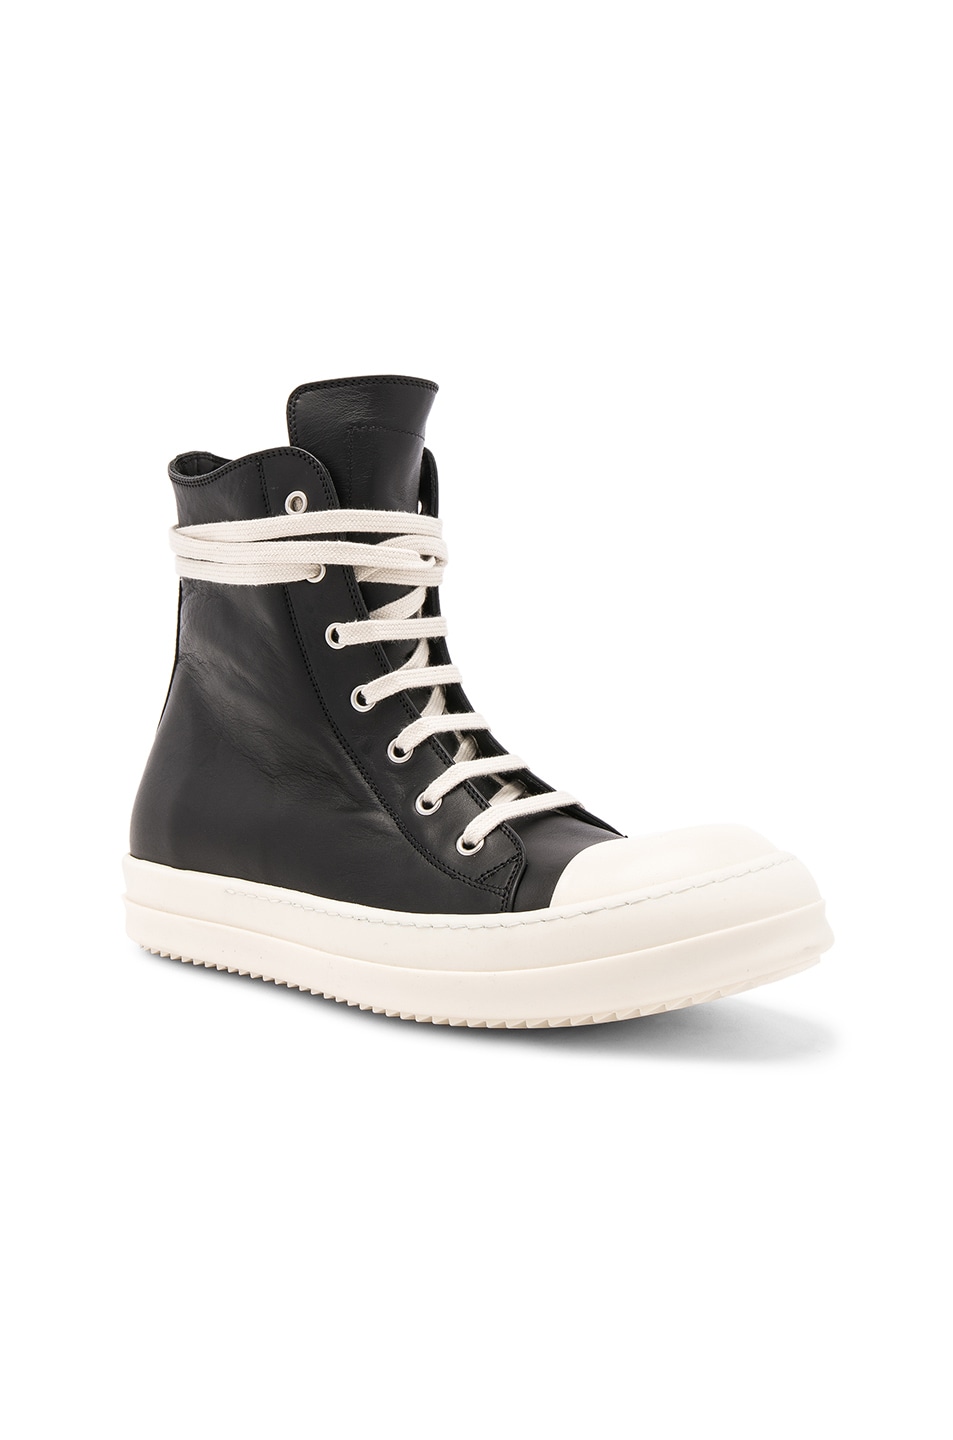 Image 1 of Rick Owens Leather Sneakers in Black & White